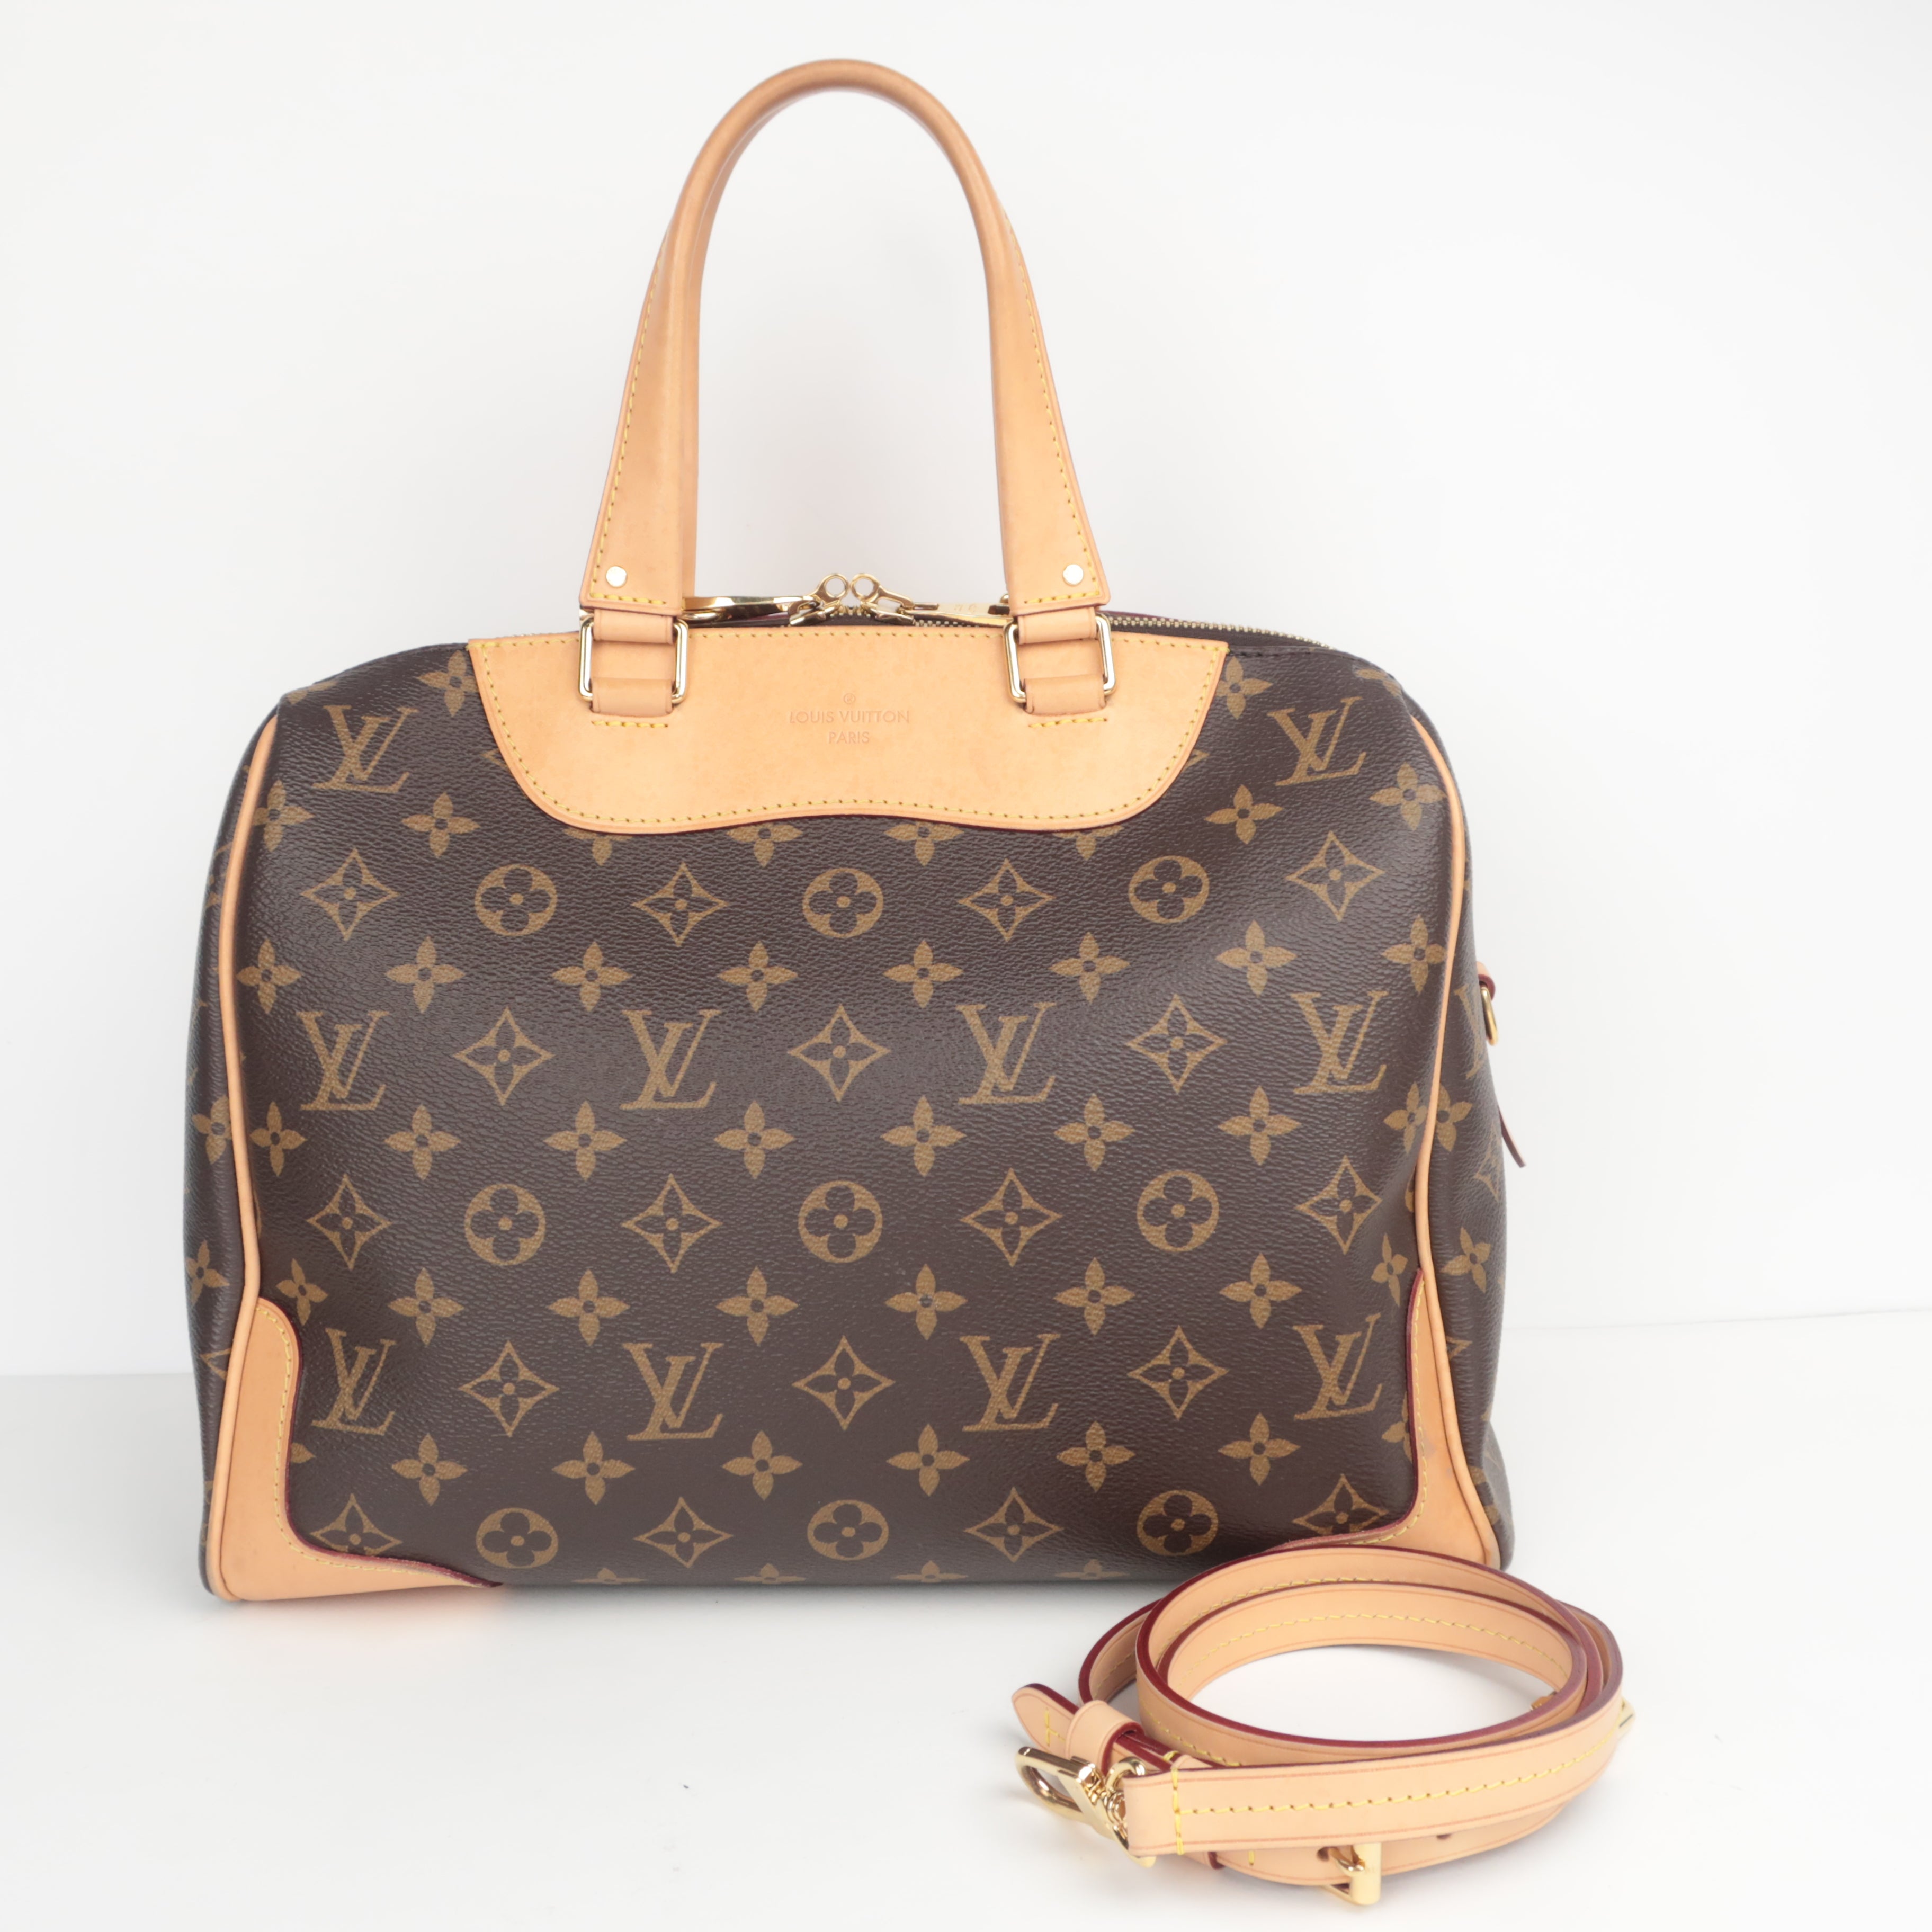 Top 10 Most Expensive Louis Vuitton Bags 2020 | Paul Smith